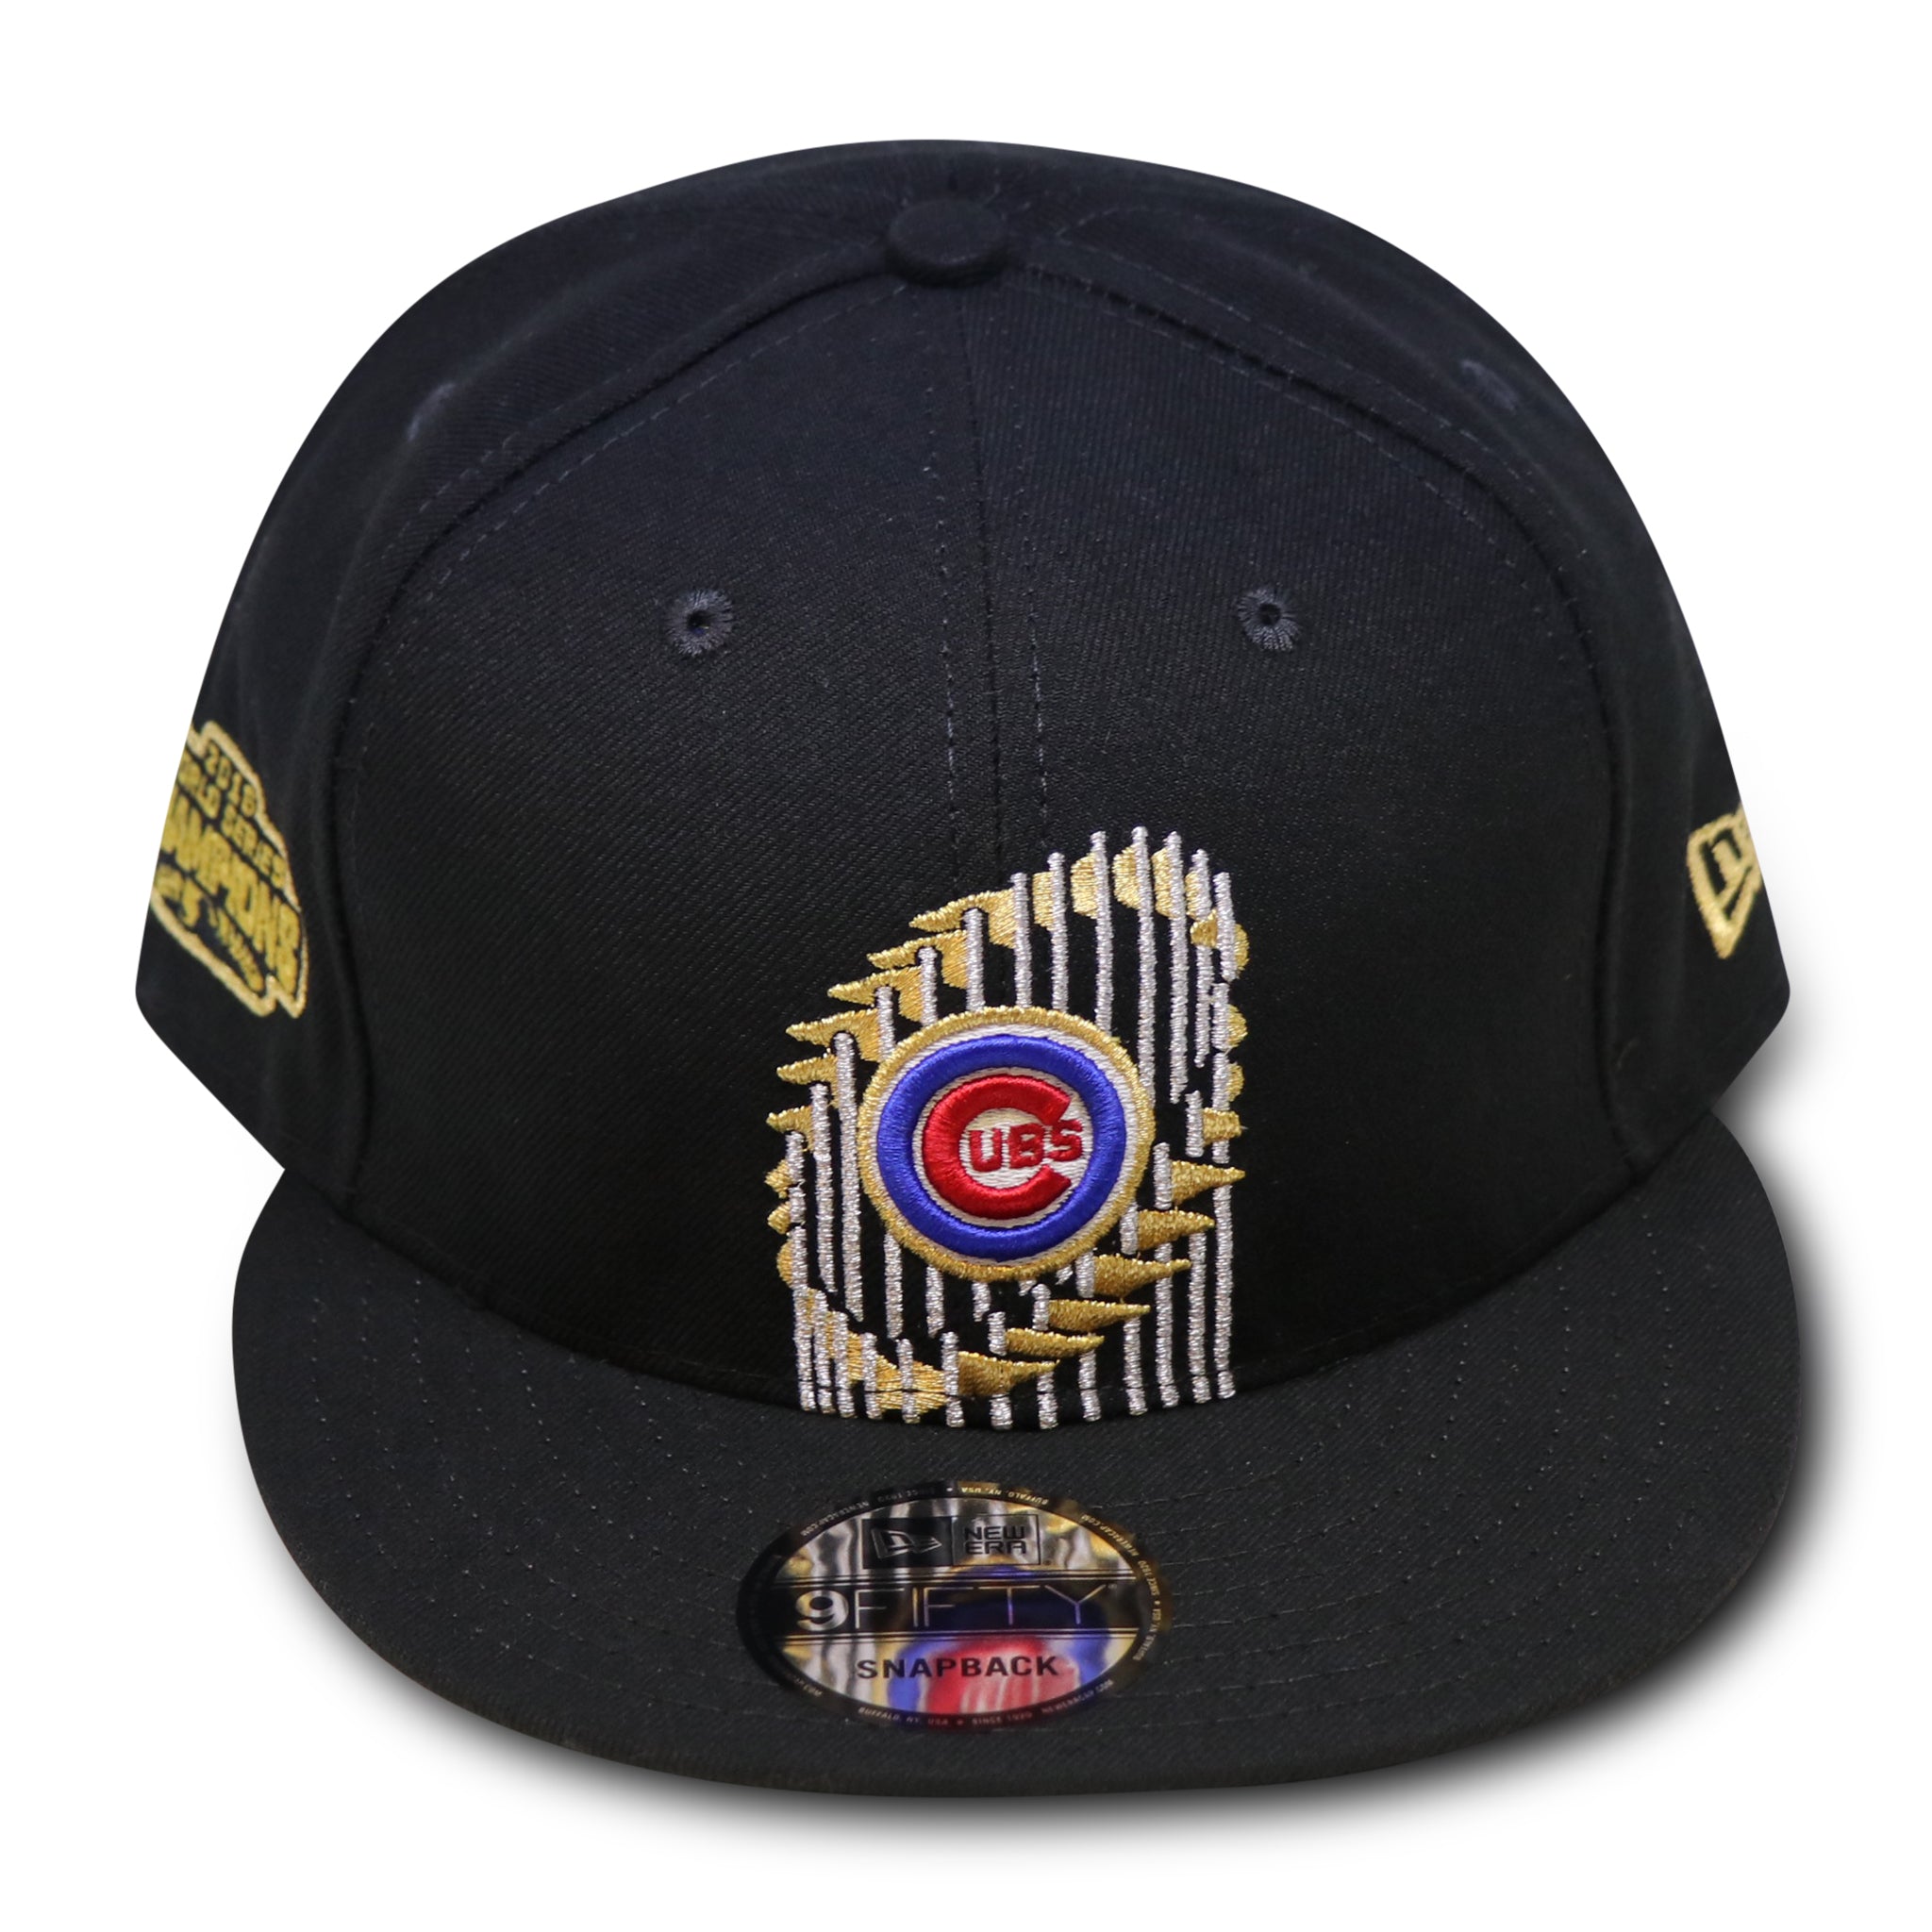 CHICAGO CUBS (2016 CHAMPIONSHIP) NEW ERA 9FIFTY SNAPBACK